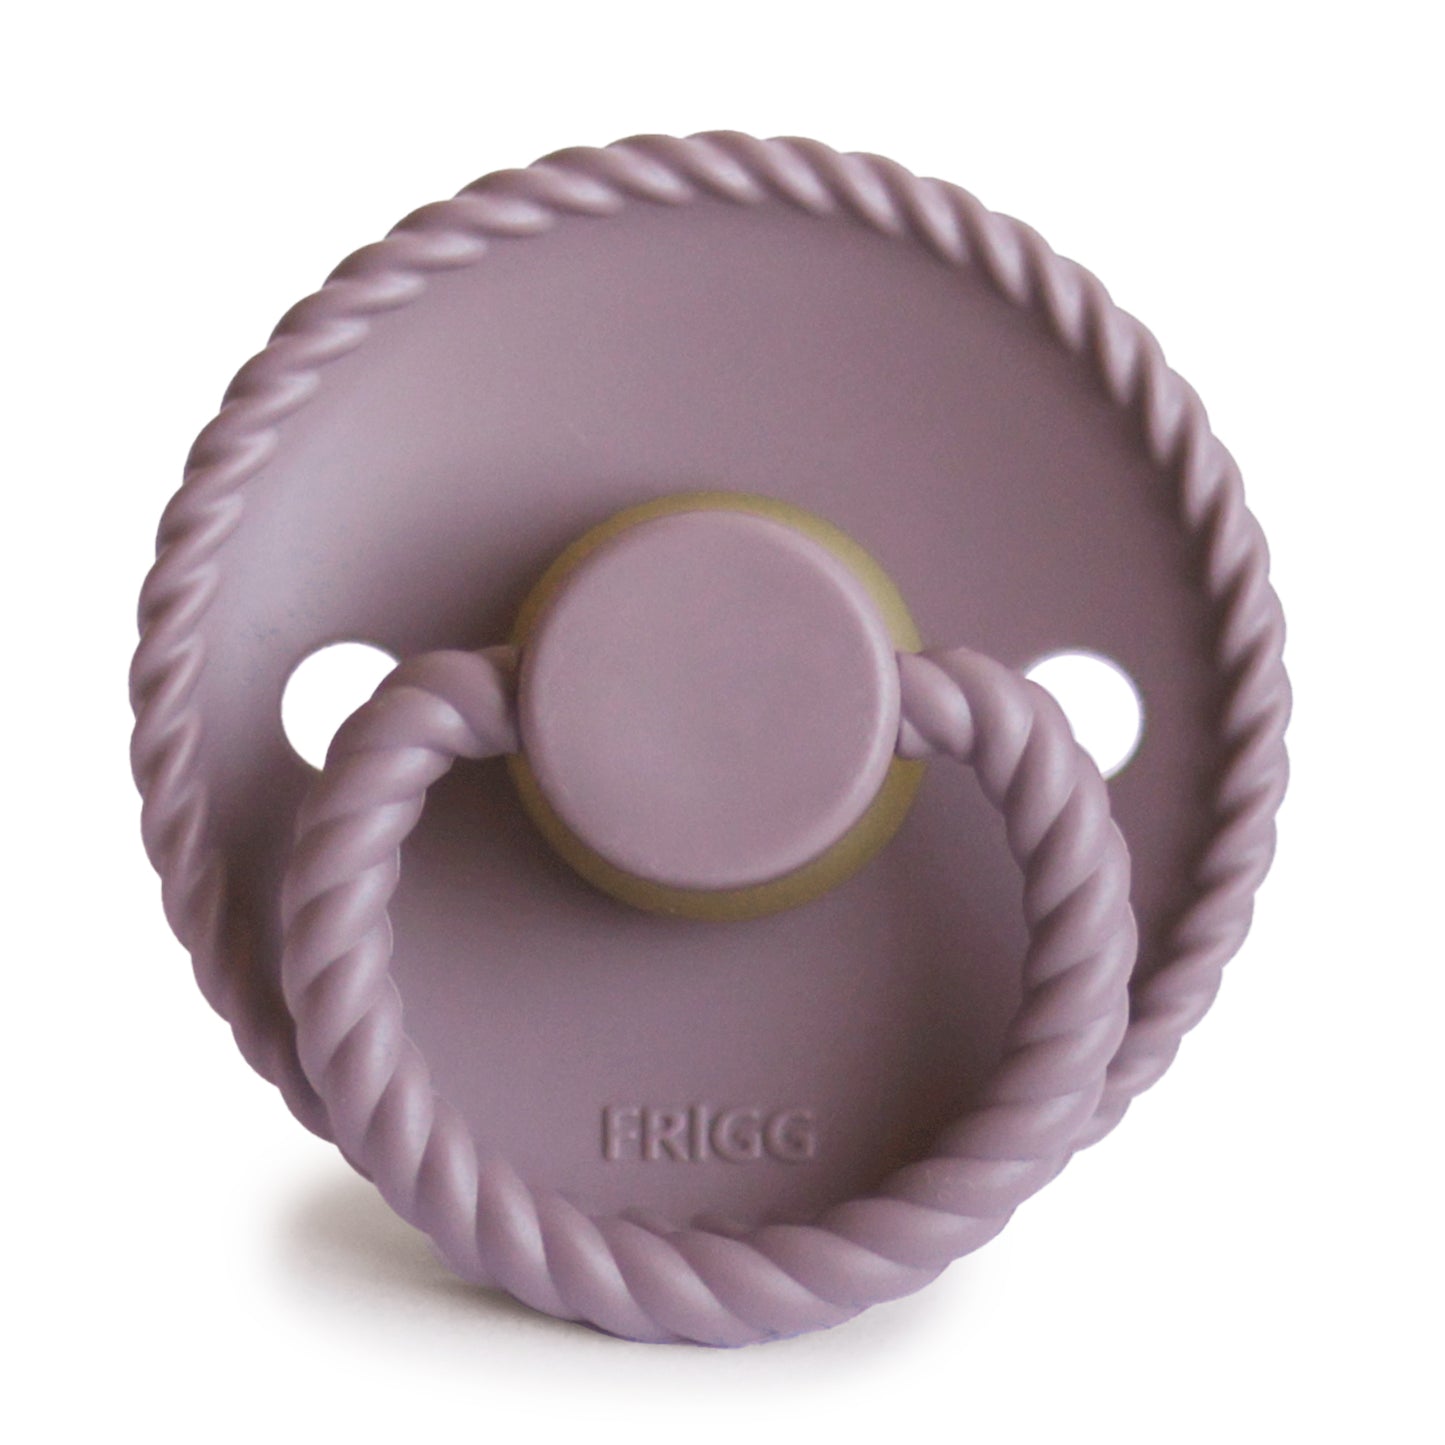 Frigg pacifier - FRIGG Rope and Rope Night - Size 2